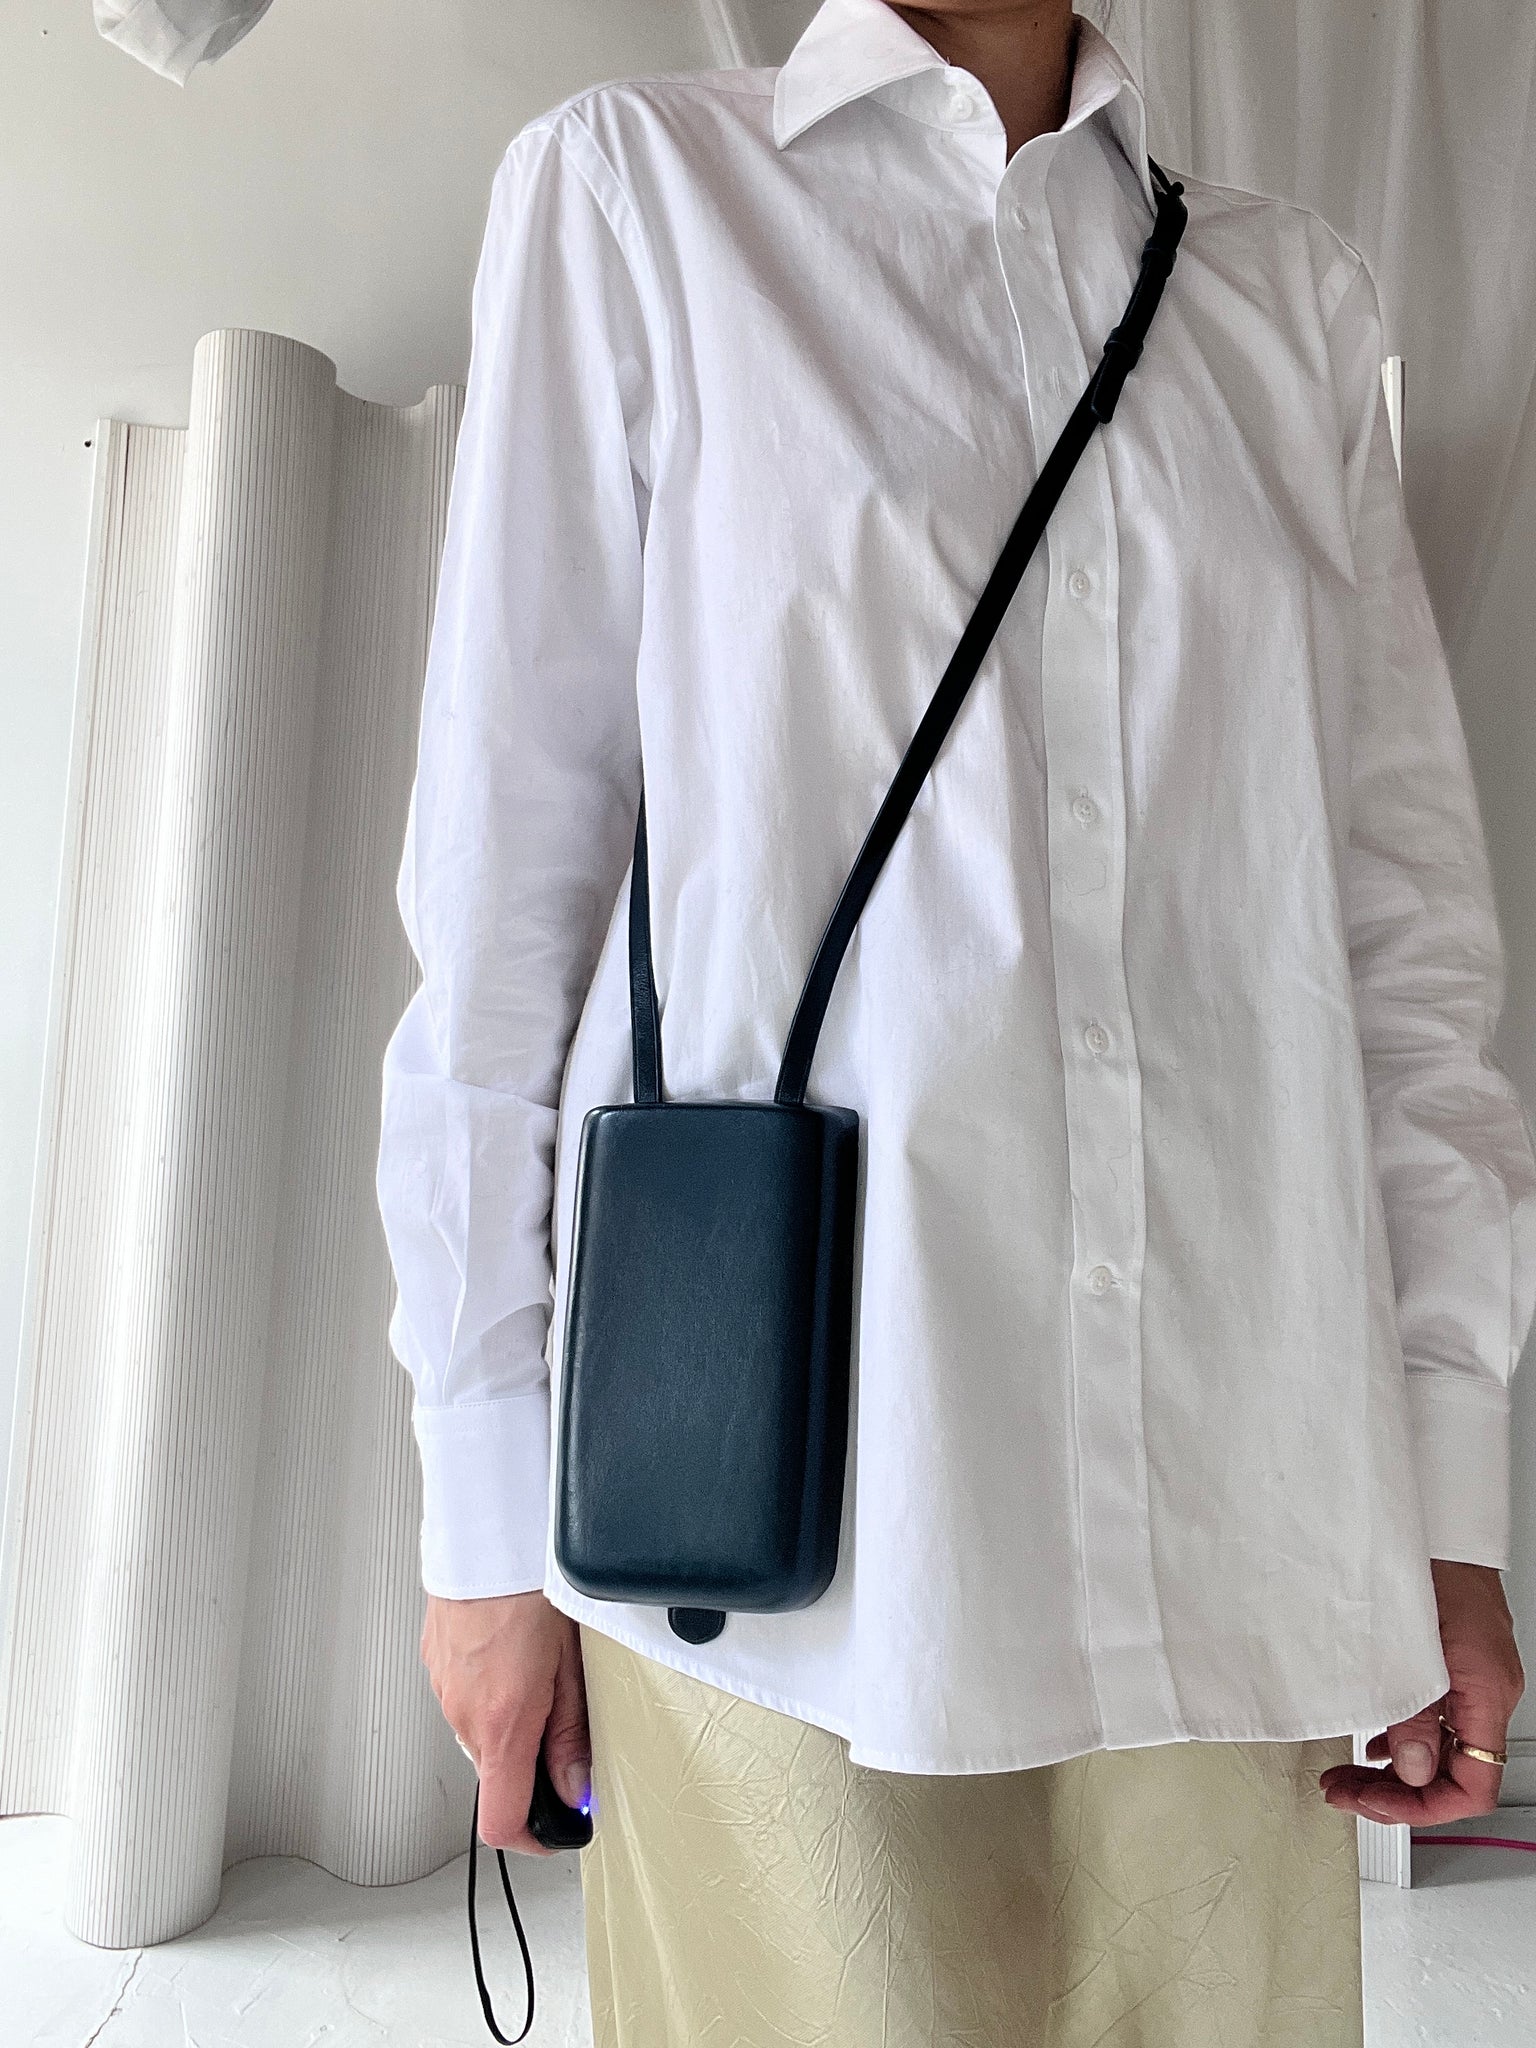 Lemaire teal molded leather bag